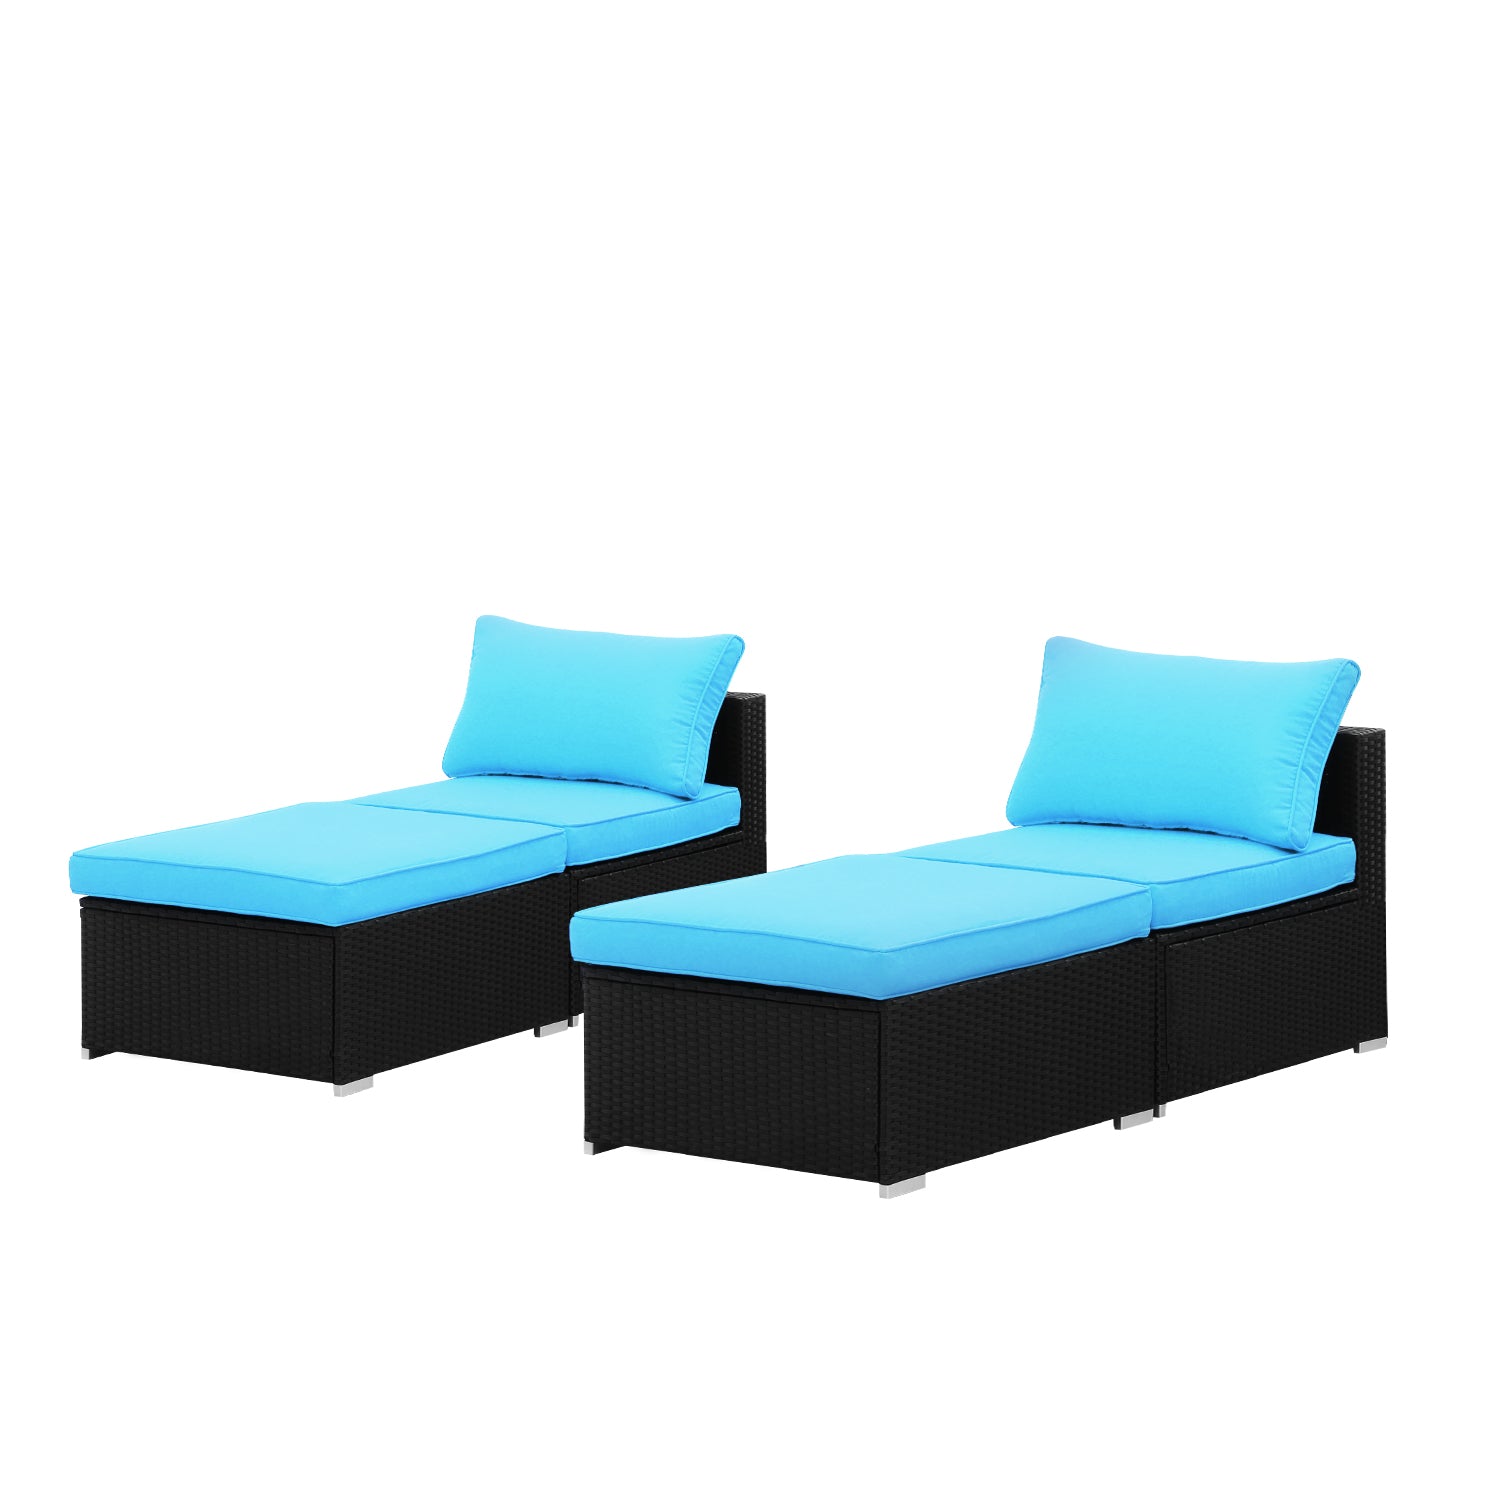 Ainfox 4 Piece Lounge Set (Various Colors) $125 + Free Shipping